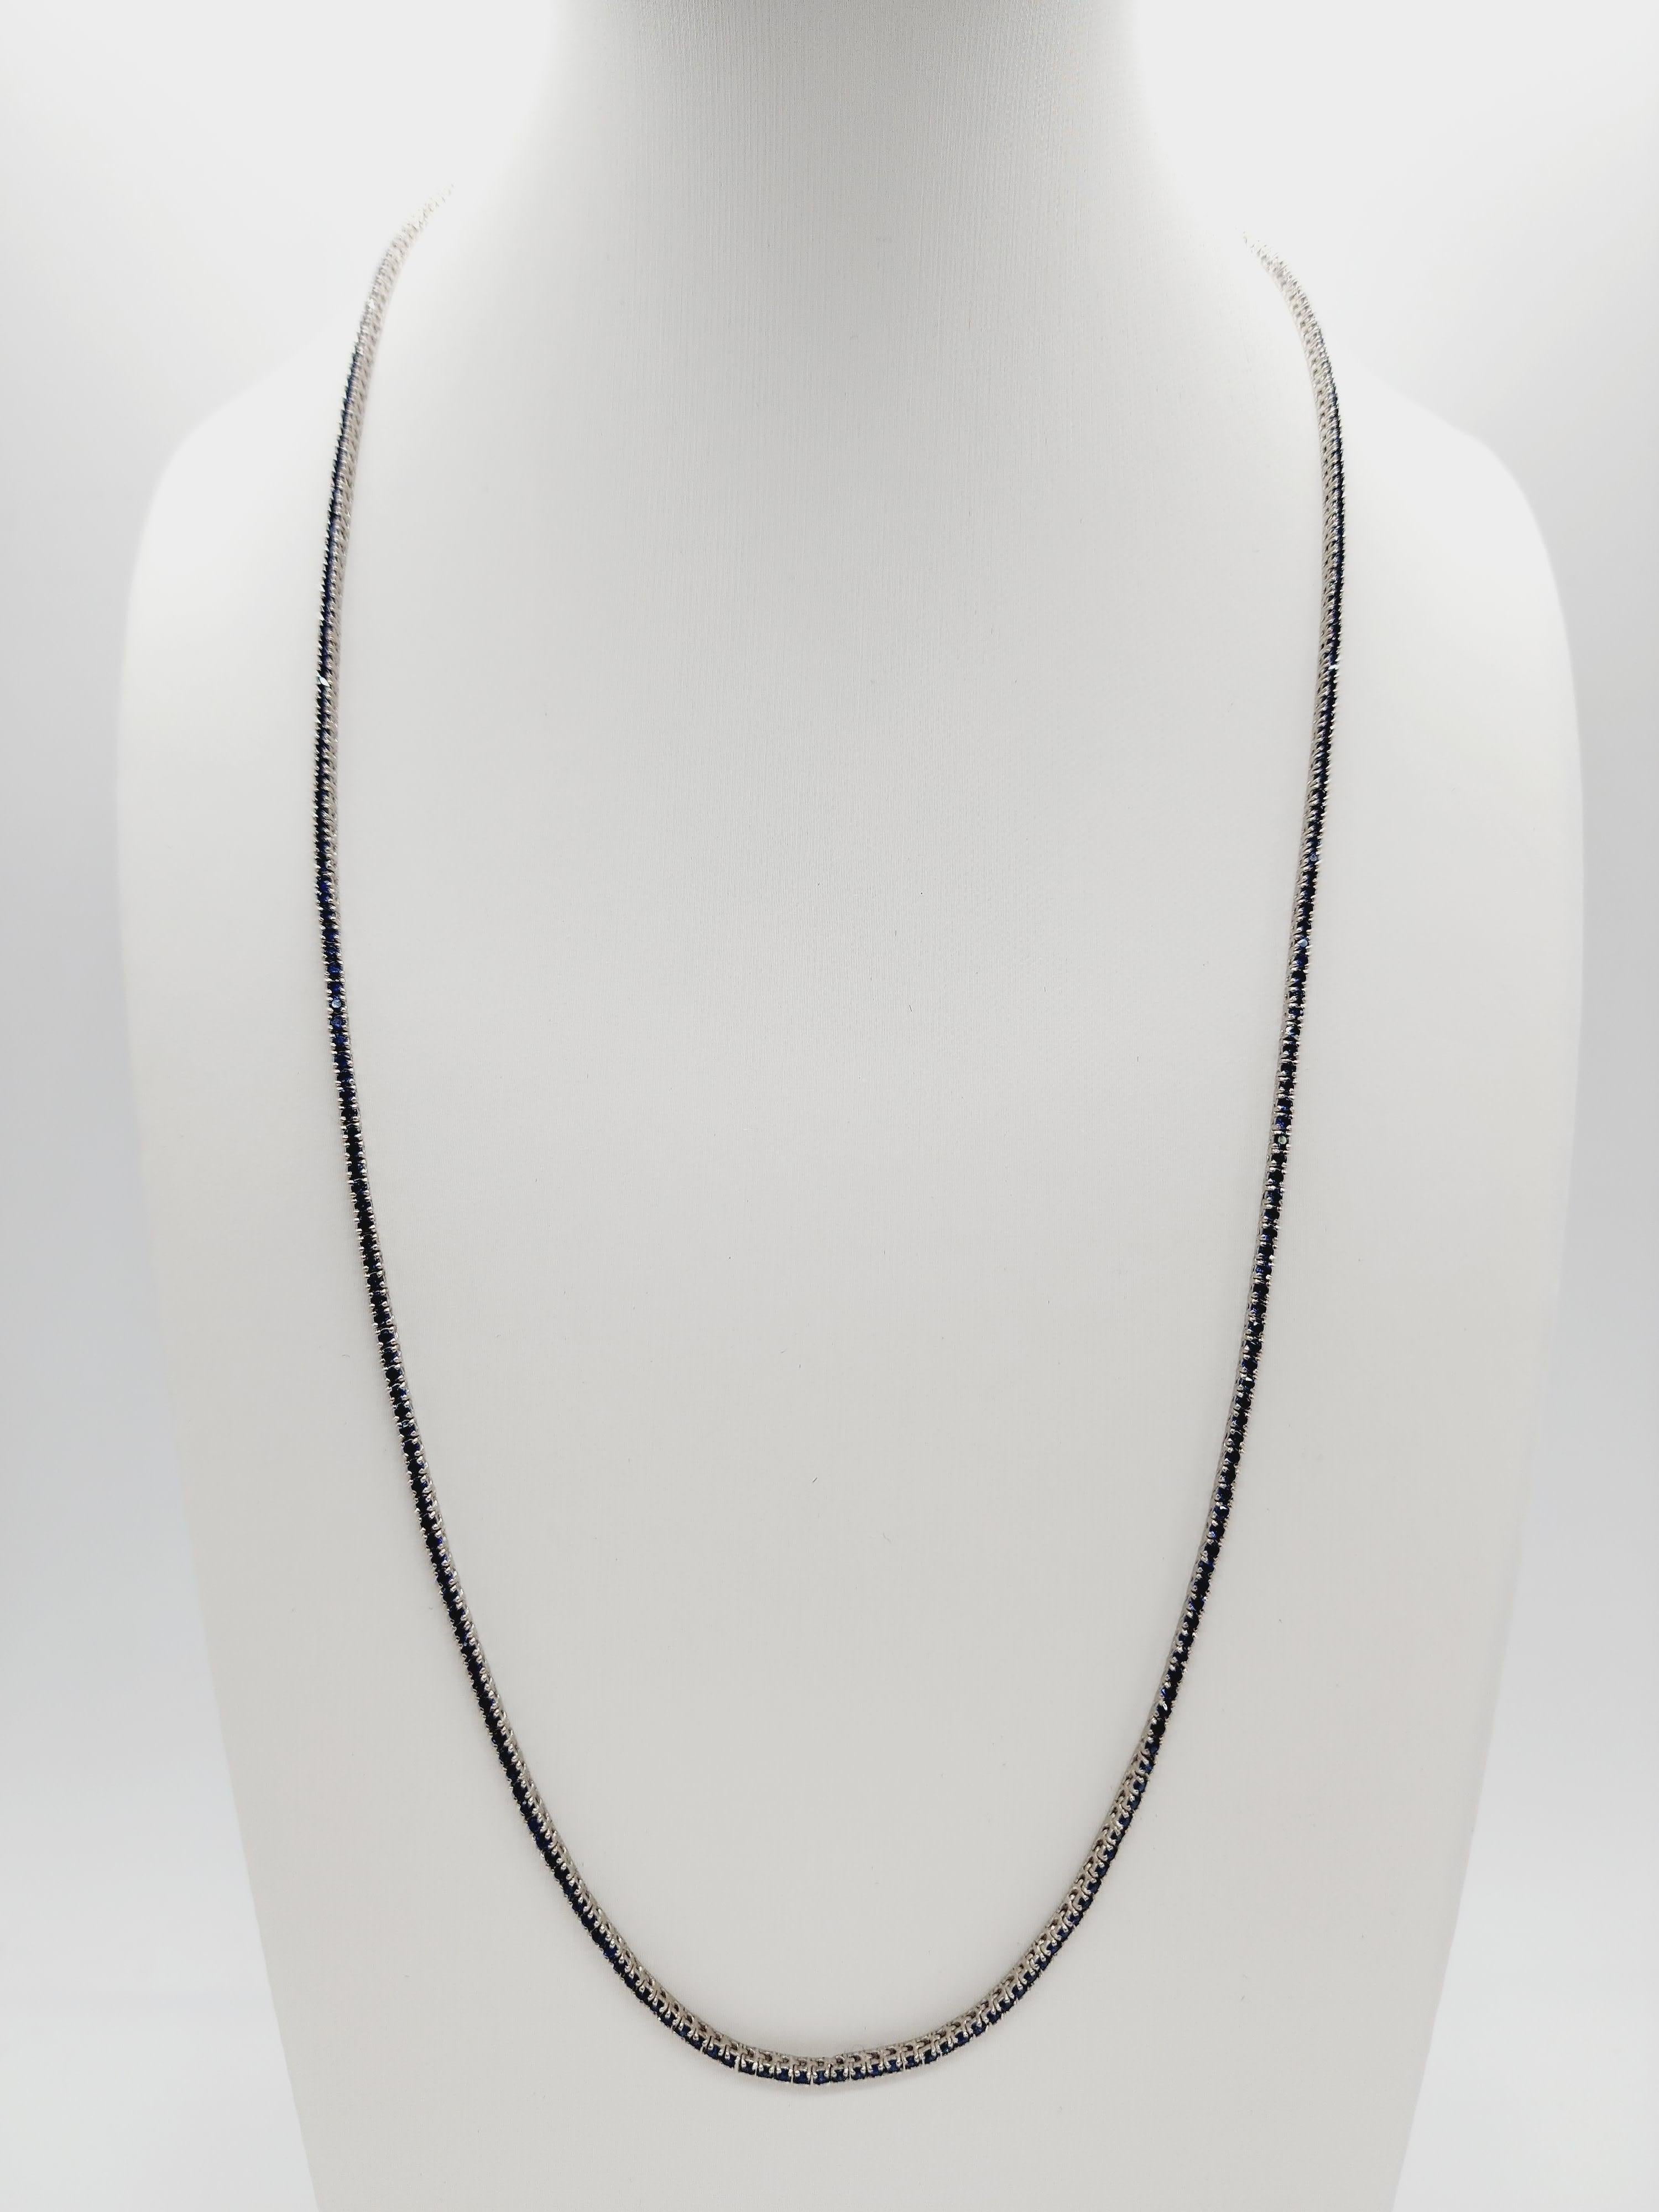 SAPPHIRE TENNIS NECKLACE WHITE GOLD 14K, 
20 INCH, 1.5 MM WIDE.

All sapphire are natural, not treated.